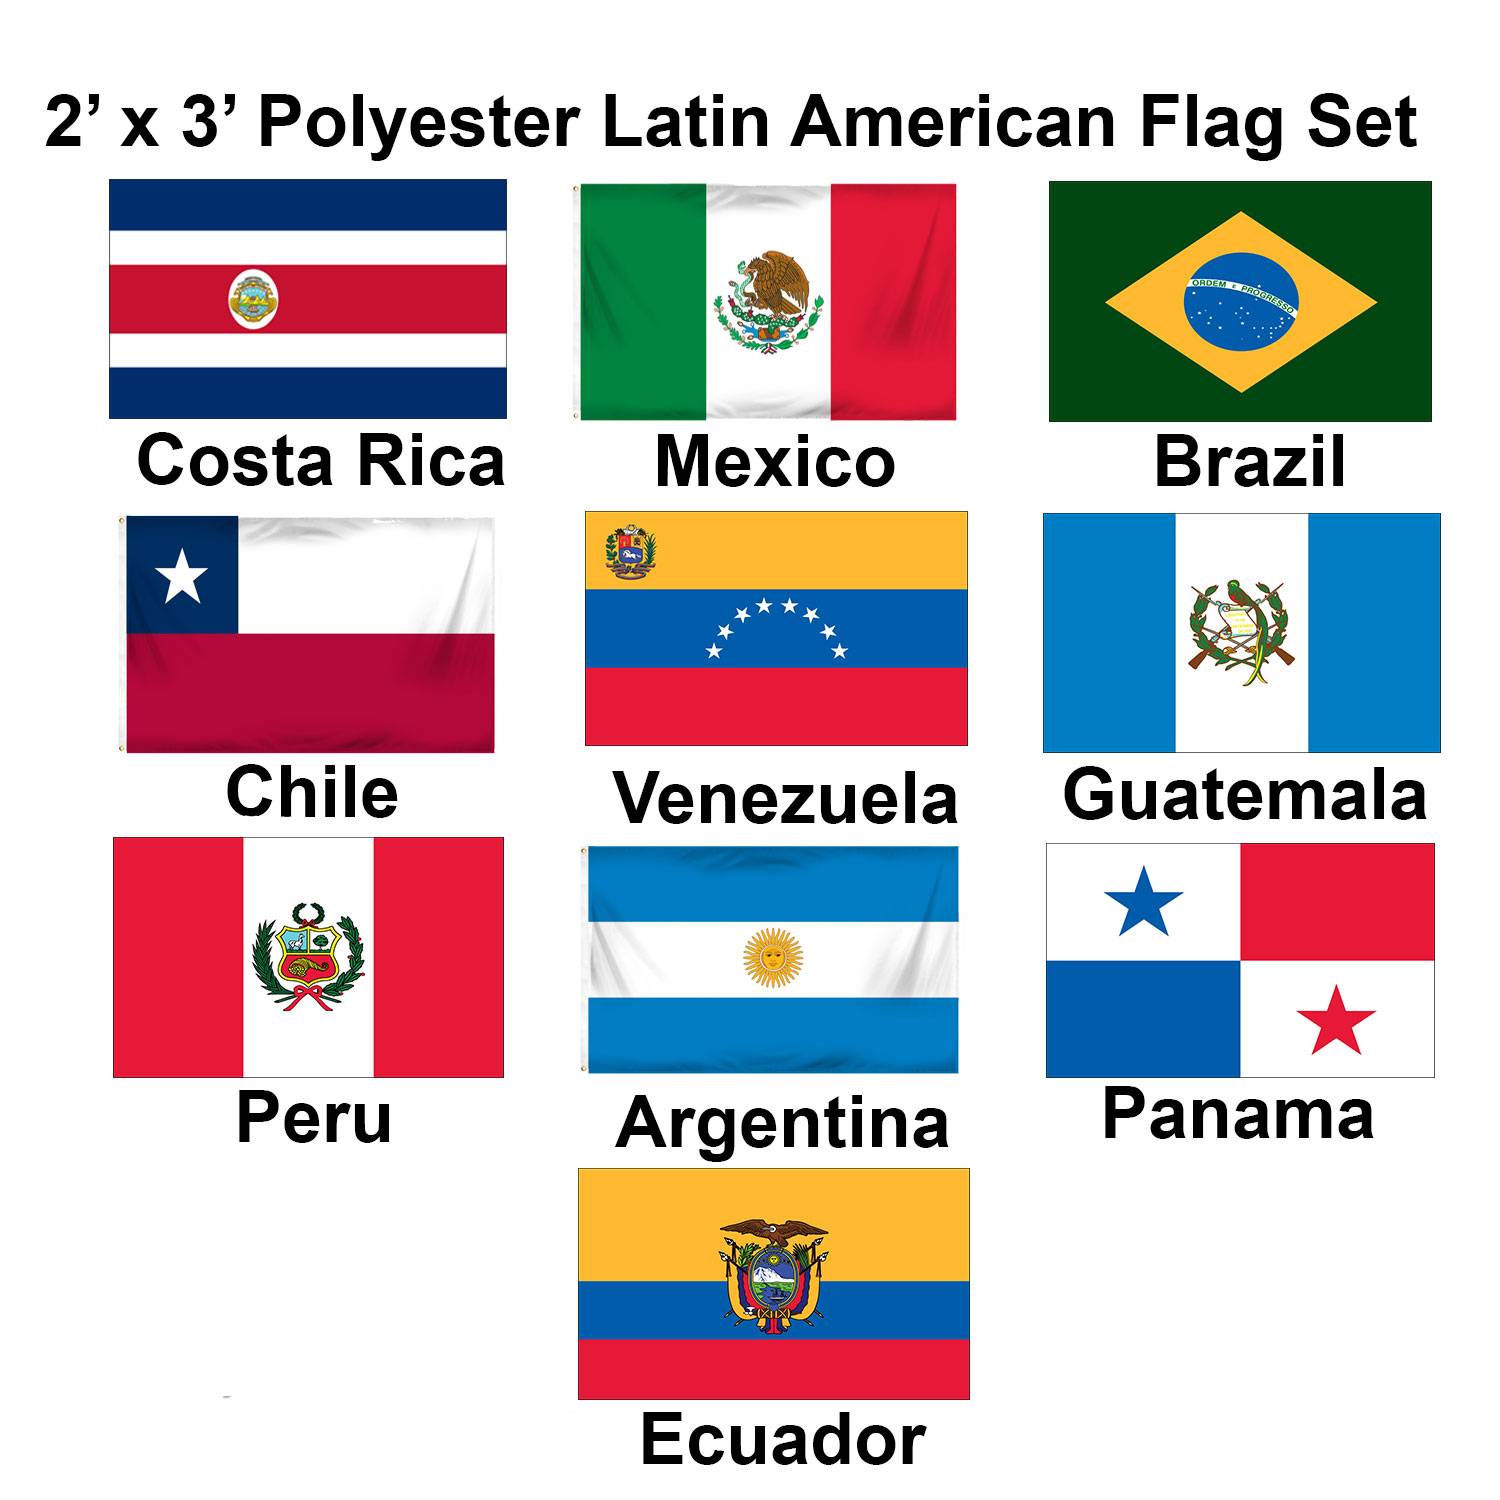 Latin American Flags For Sale Affordable school and church flags